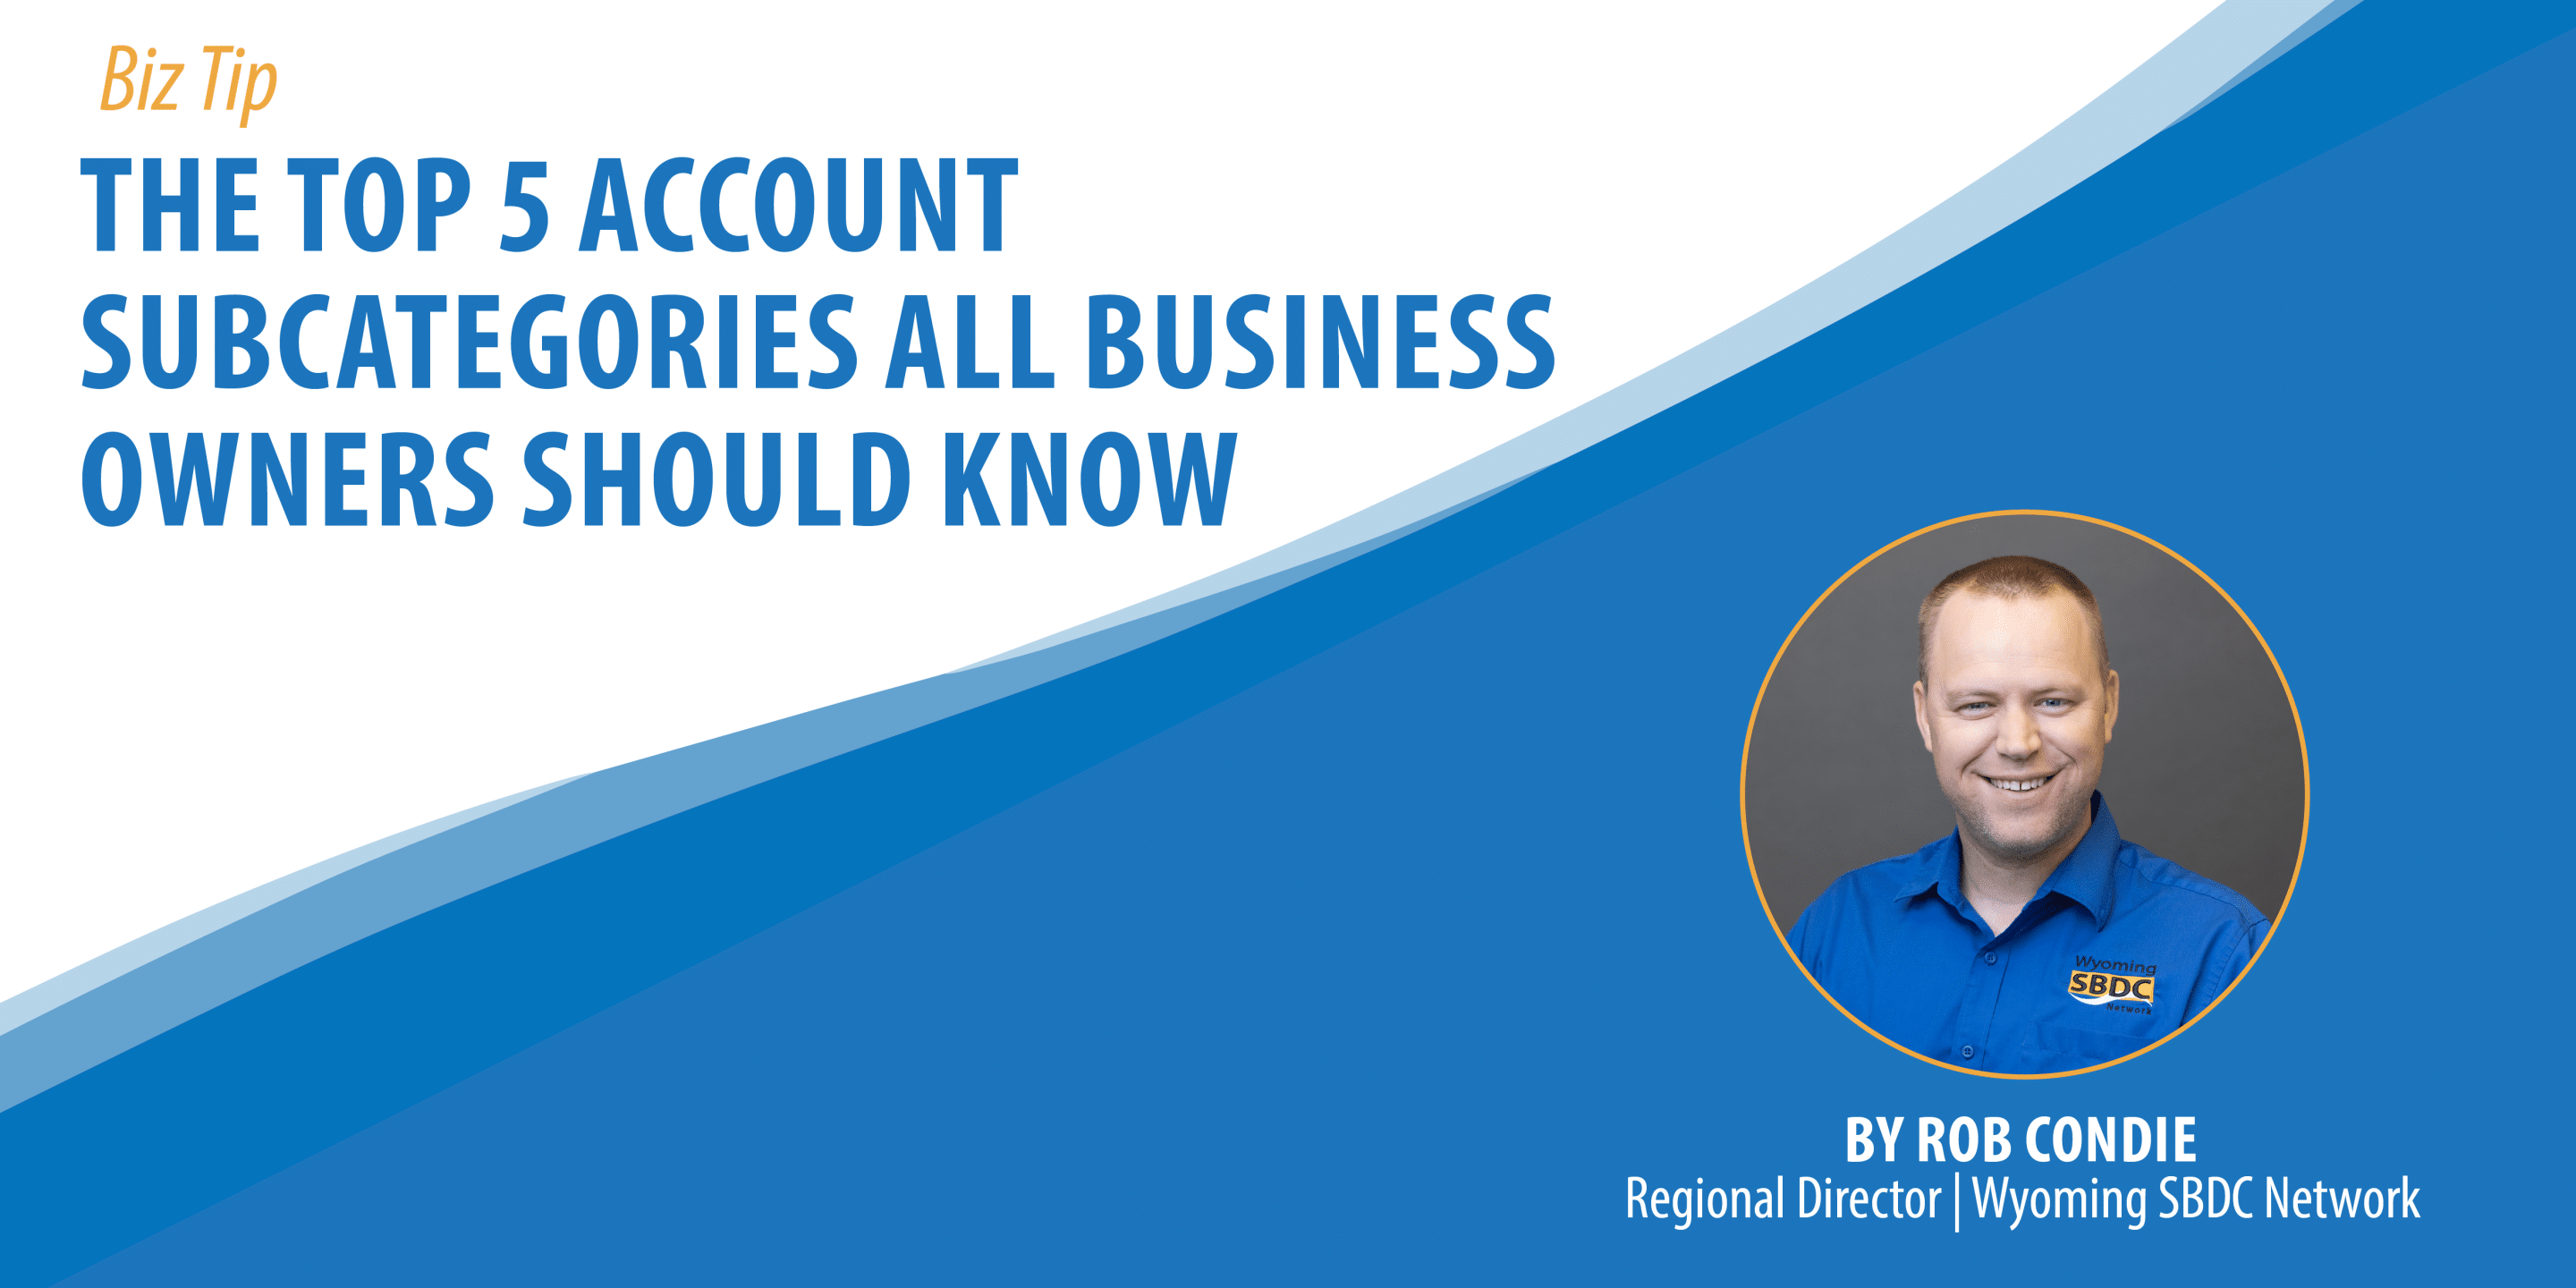 The Top 5 Account Subcategories All Business Owners Should Know